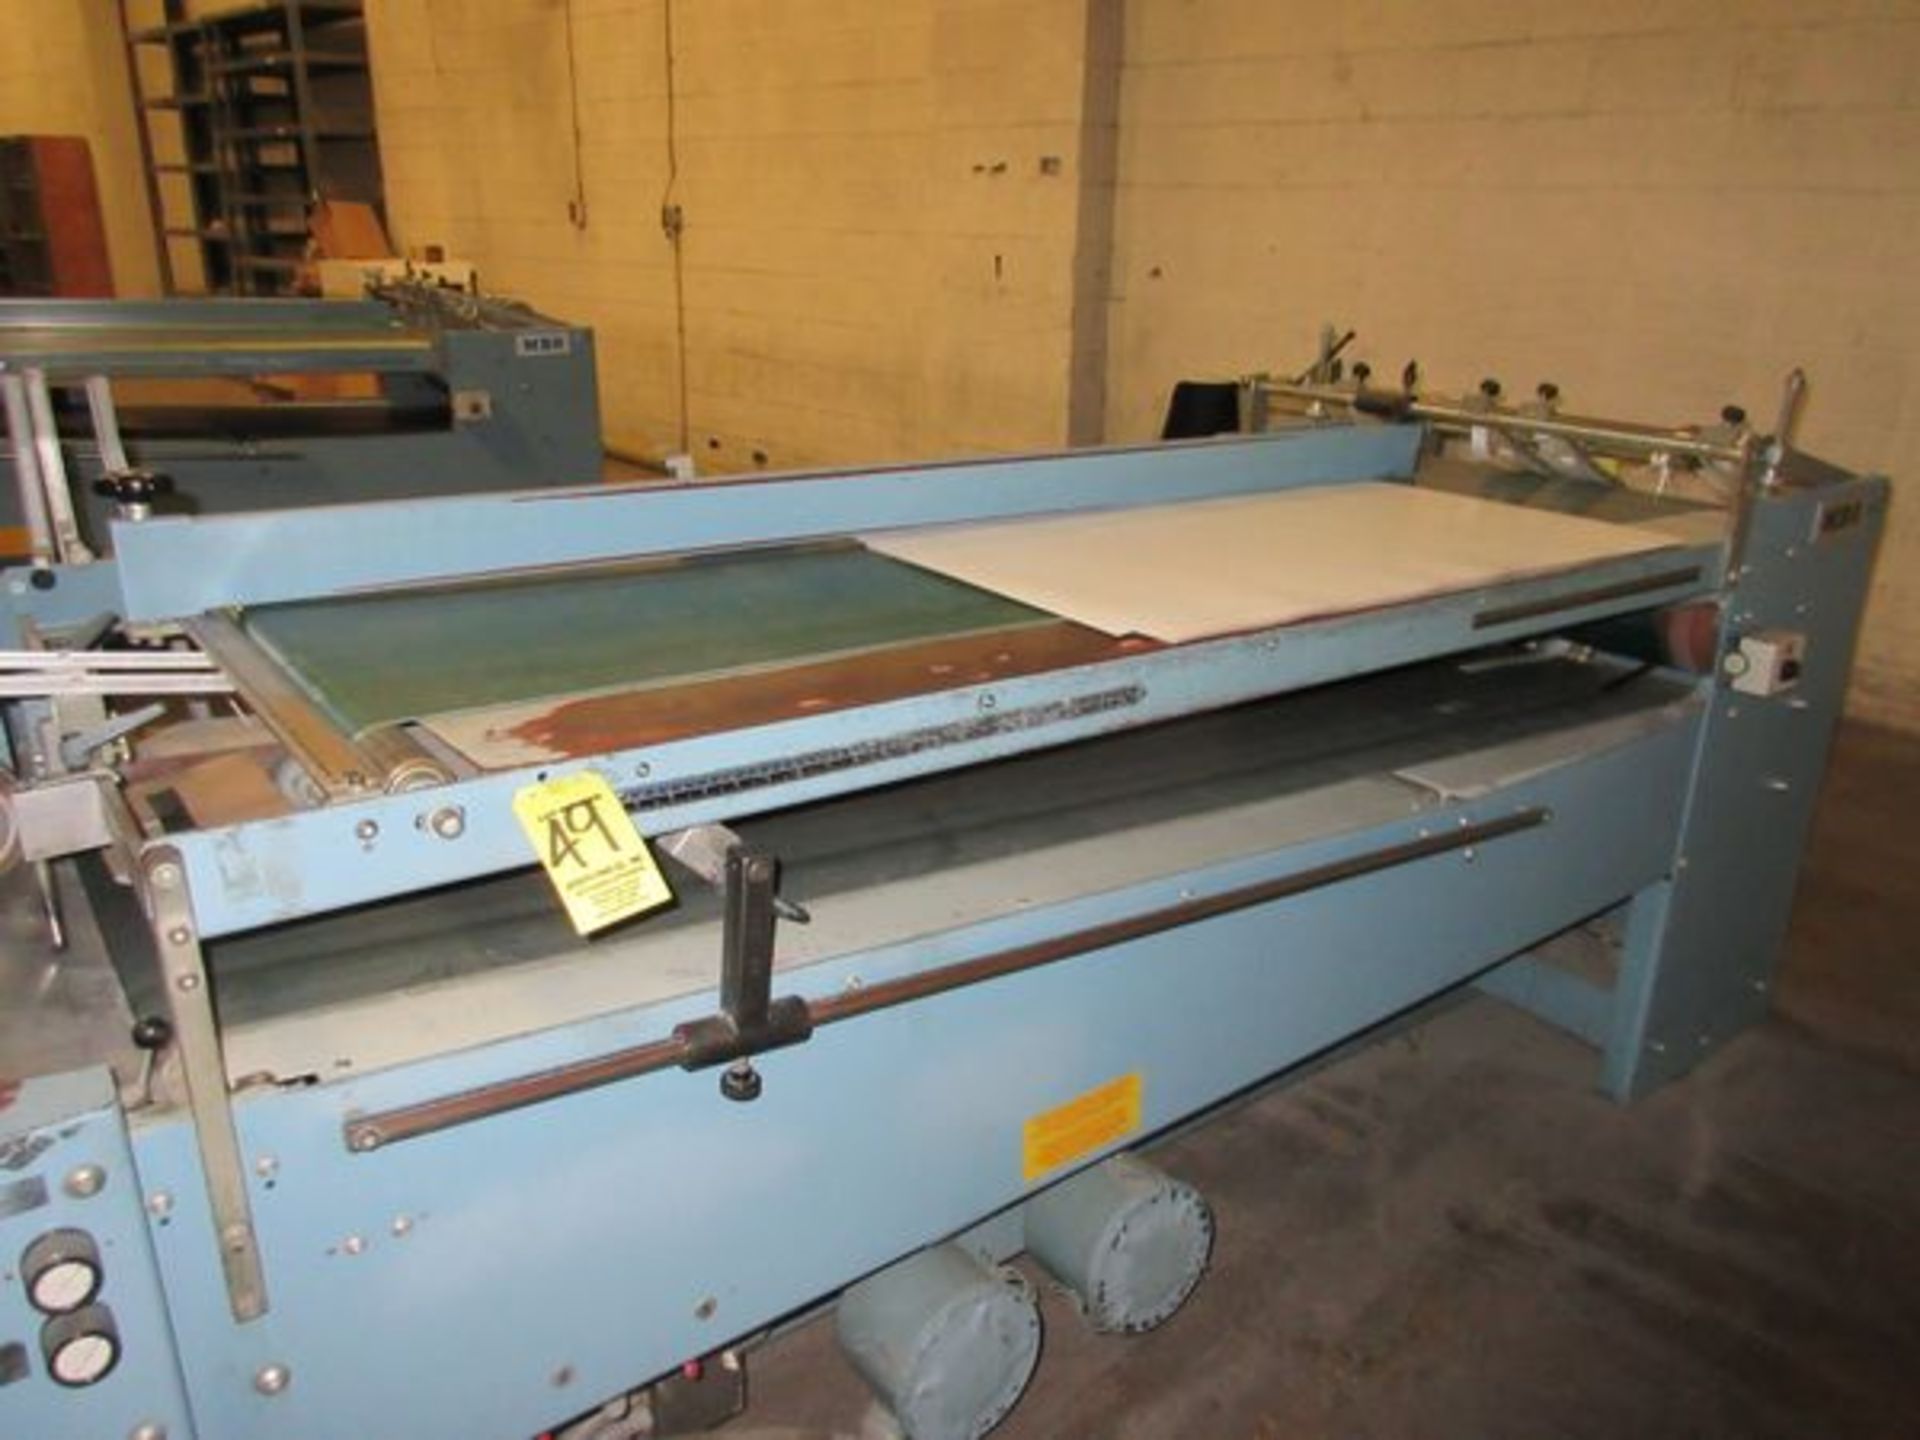 MBO Model B123-C Continuous Feed Folder, Order #960849, s/n N11/07, MCC Counter, Control, Exit - Image 5 of 6